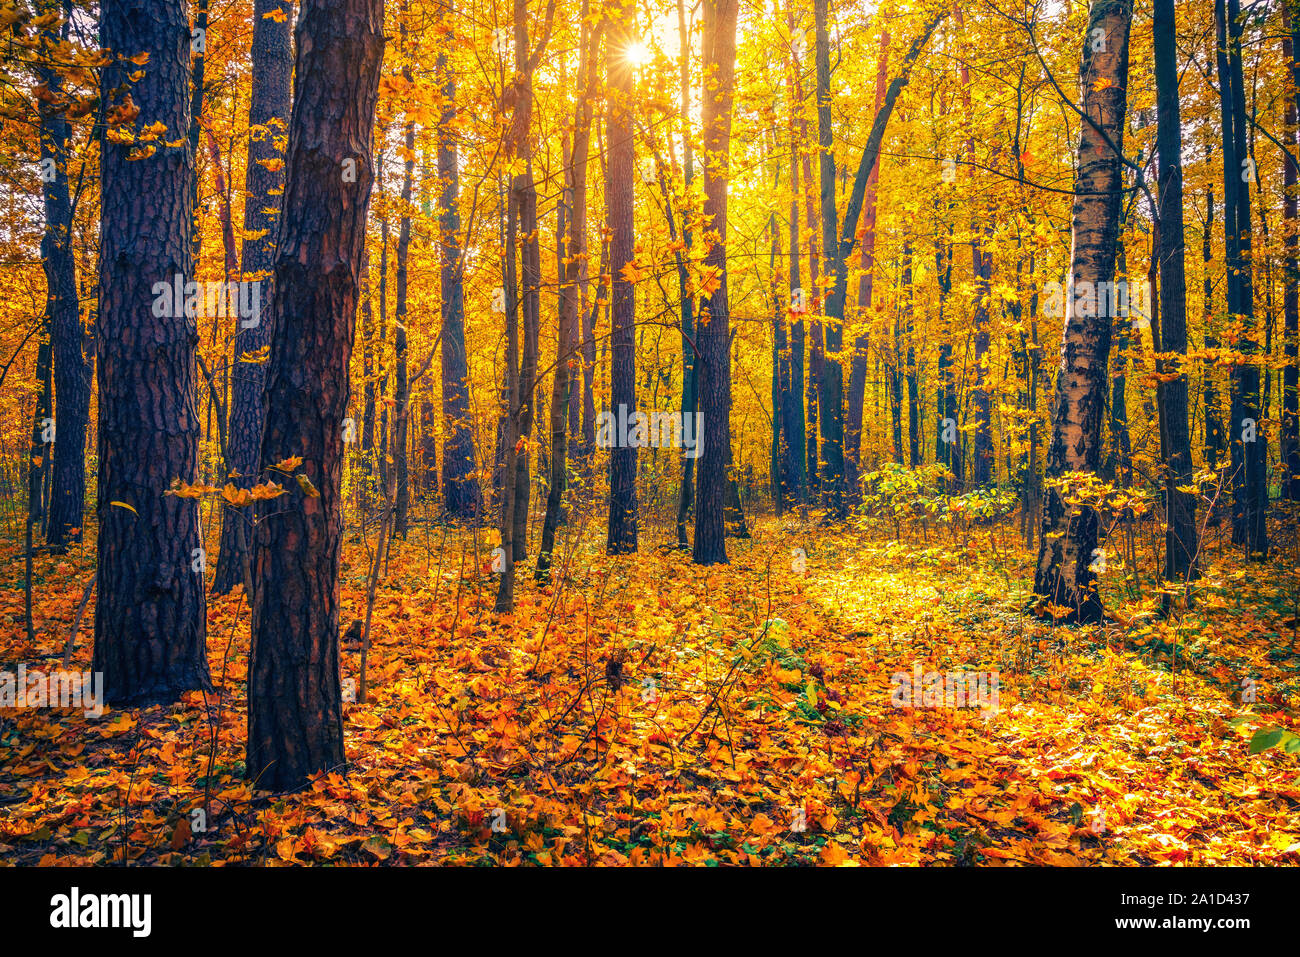 Bright trees in sunny autumn forest Stock Photo